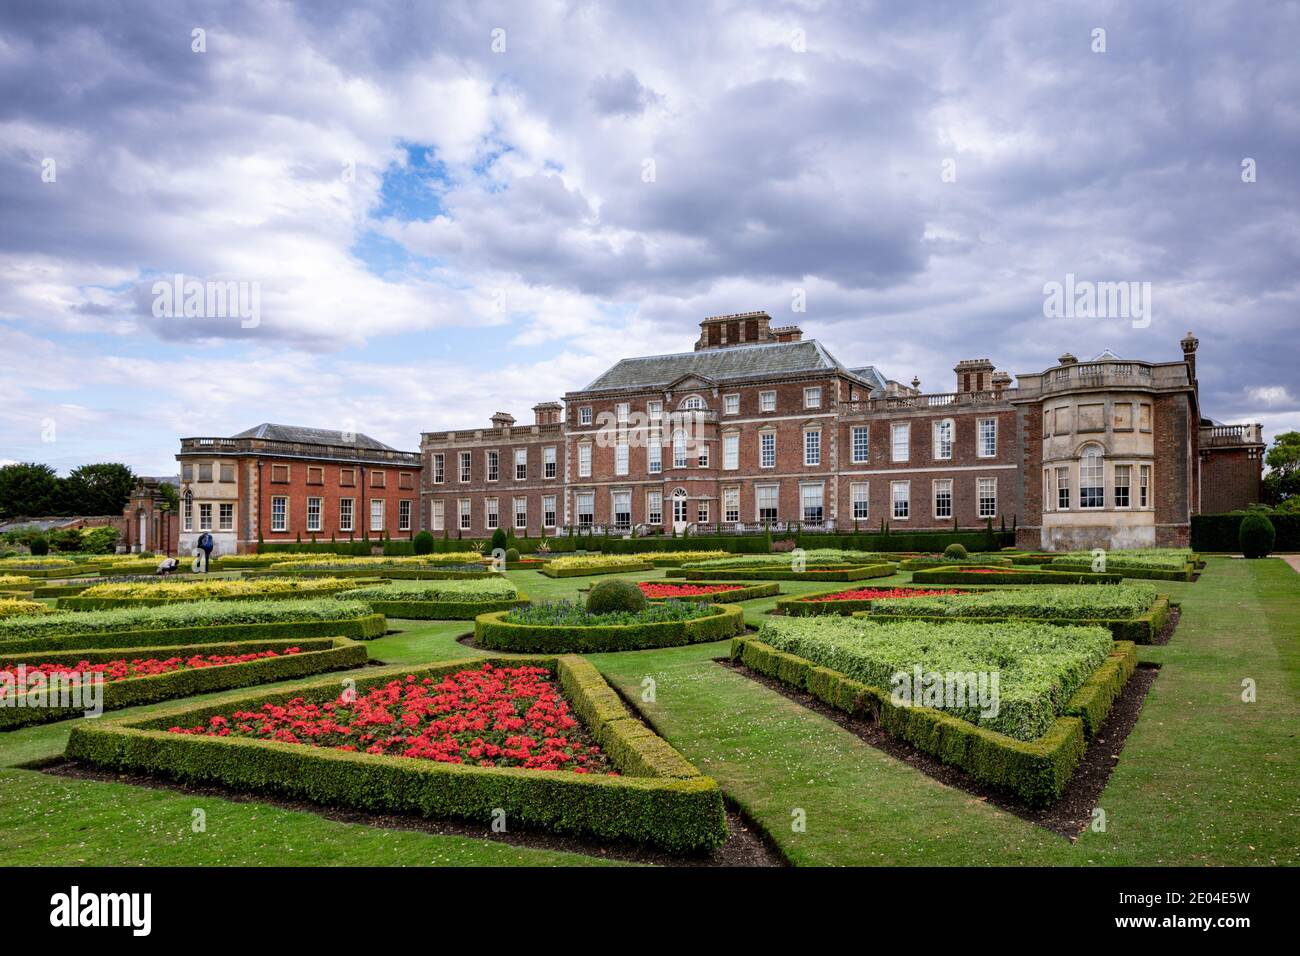 Wimpole Hall, a country house located in the Wimpole Estate, Cambridgeshire, England. Stock Photo